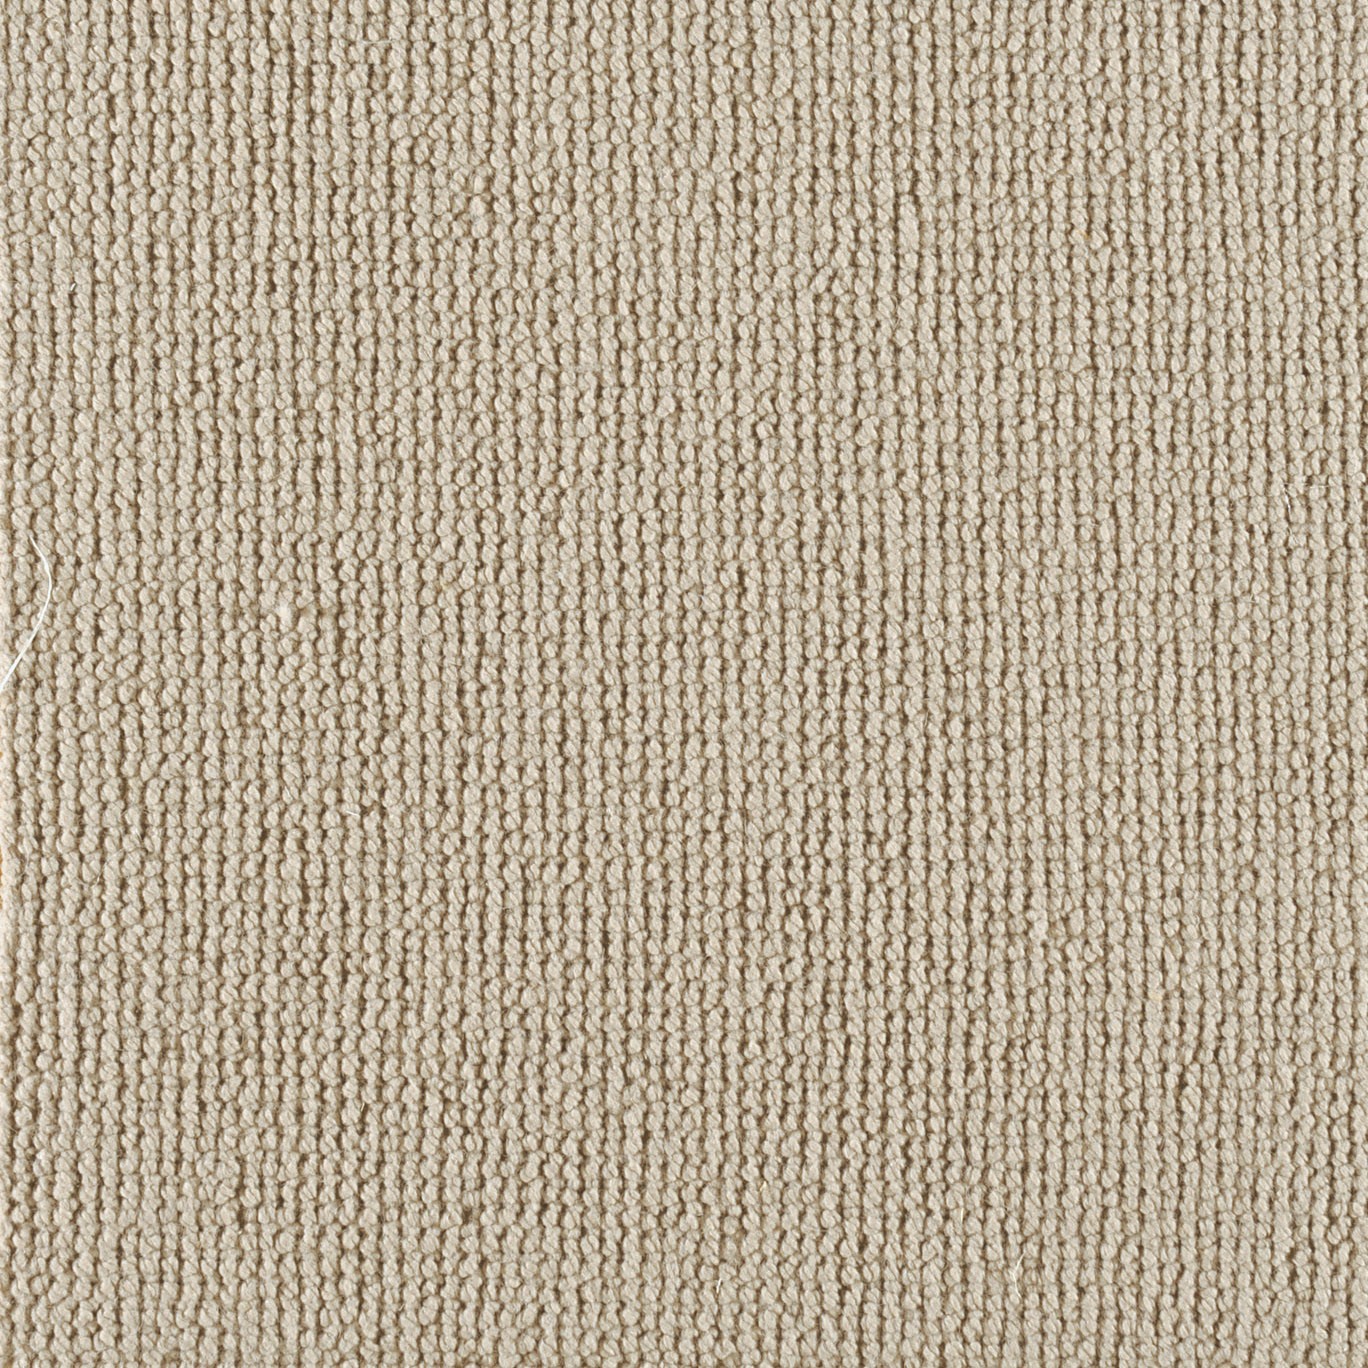 Wool Home Depo Striped Tufted Carpet-2 Manufacturers, Wool Home Depo Striped Tufted Carpet-2 Factory, Supply Wool Home Depo Striped Tufted Carpet-2